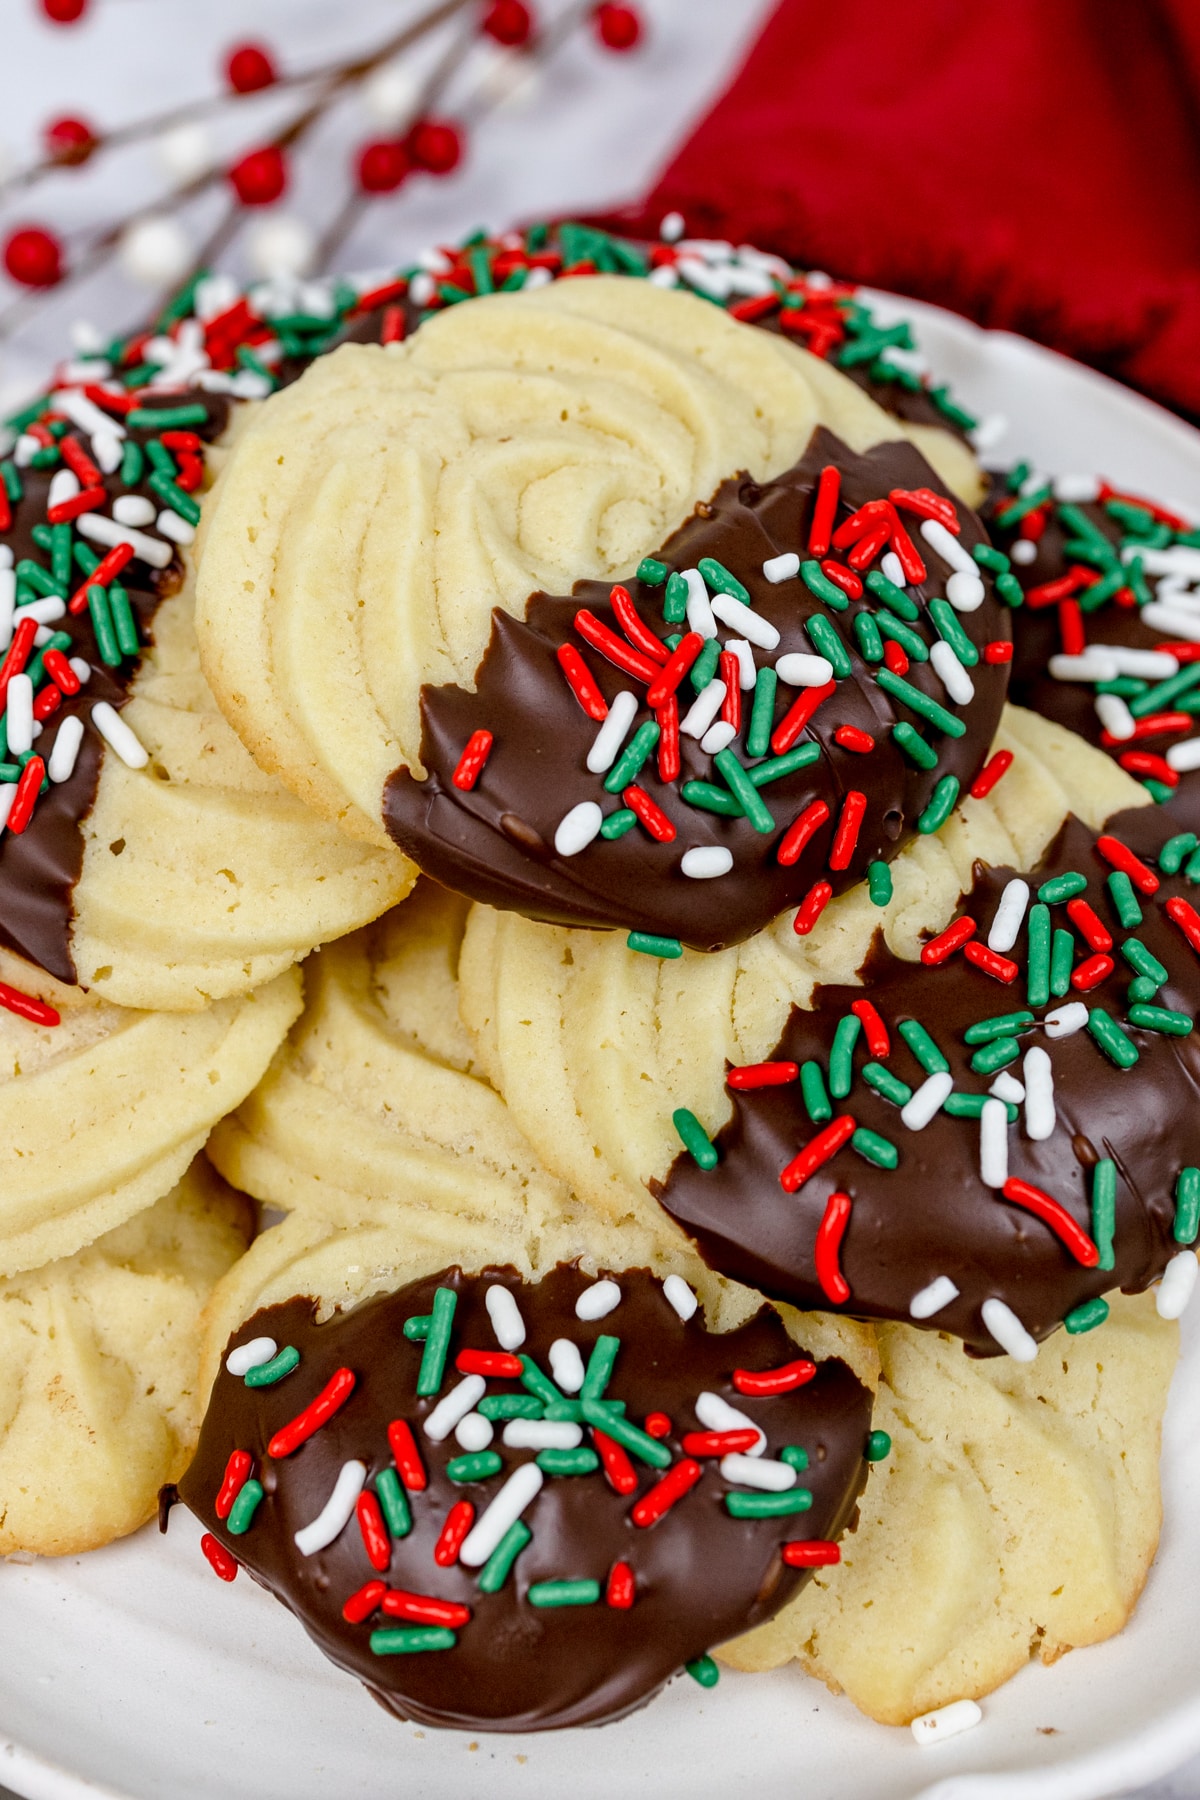 Swirl butter cookies with chocolate and festive sprinkles on them.